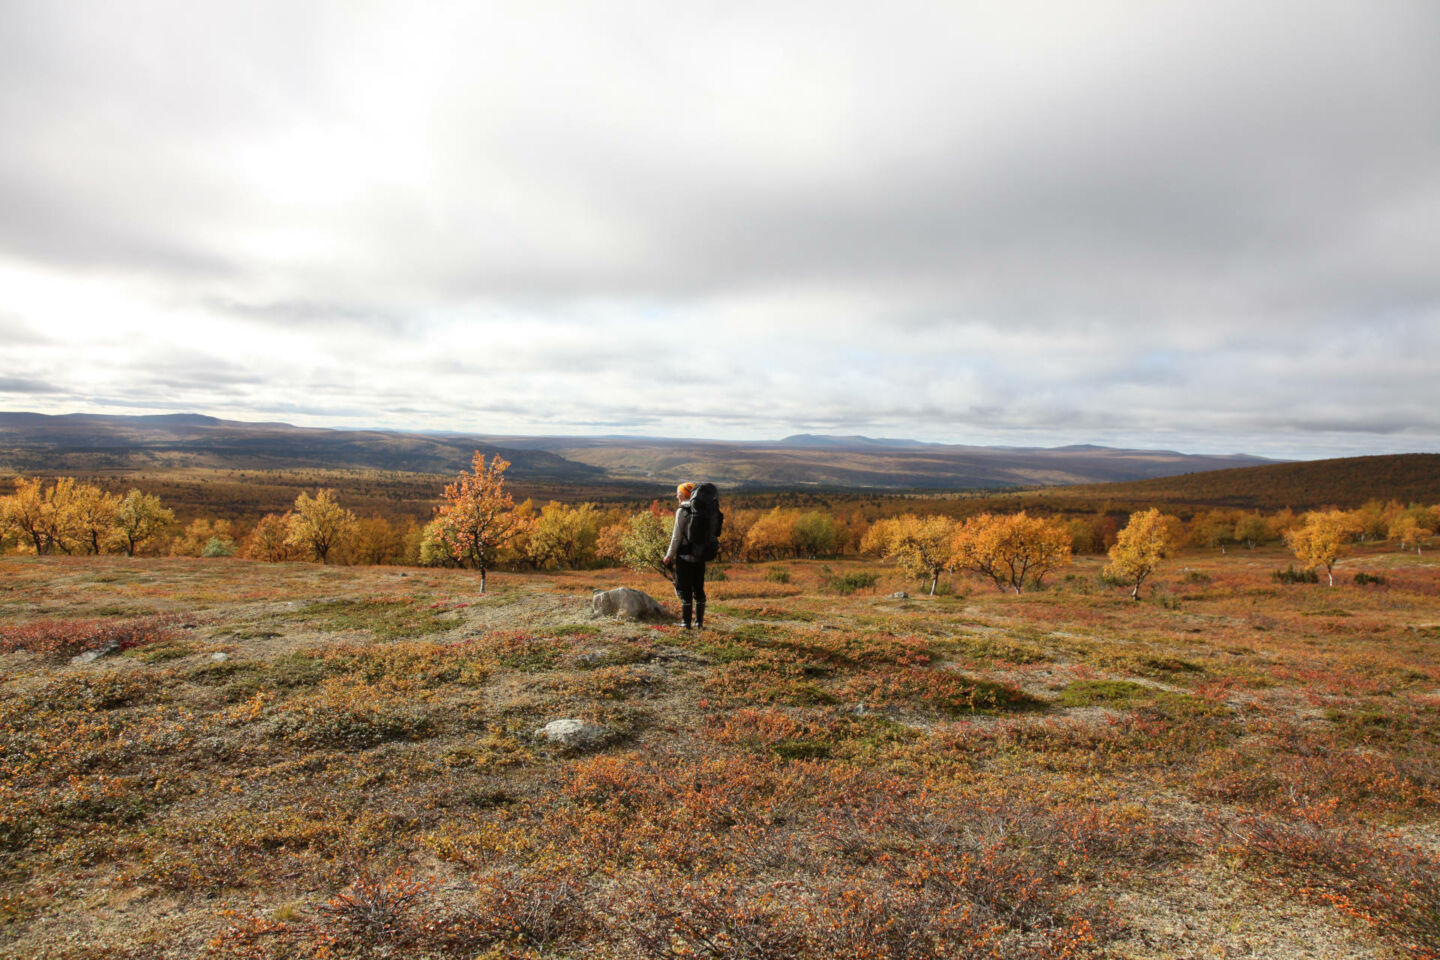 Everyman's Right means in most case and most places, no permit is required for filming in Finnish Lapland